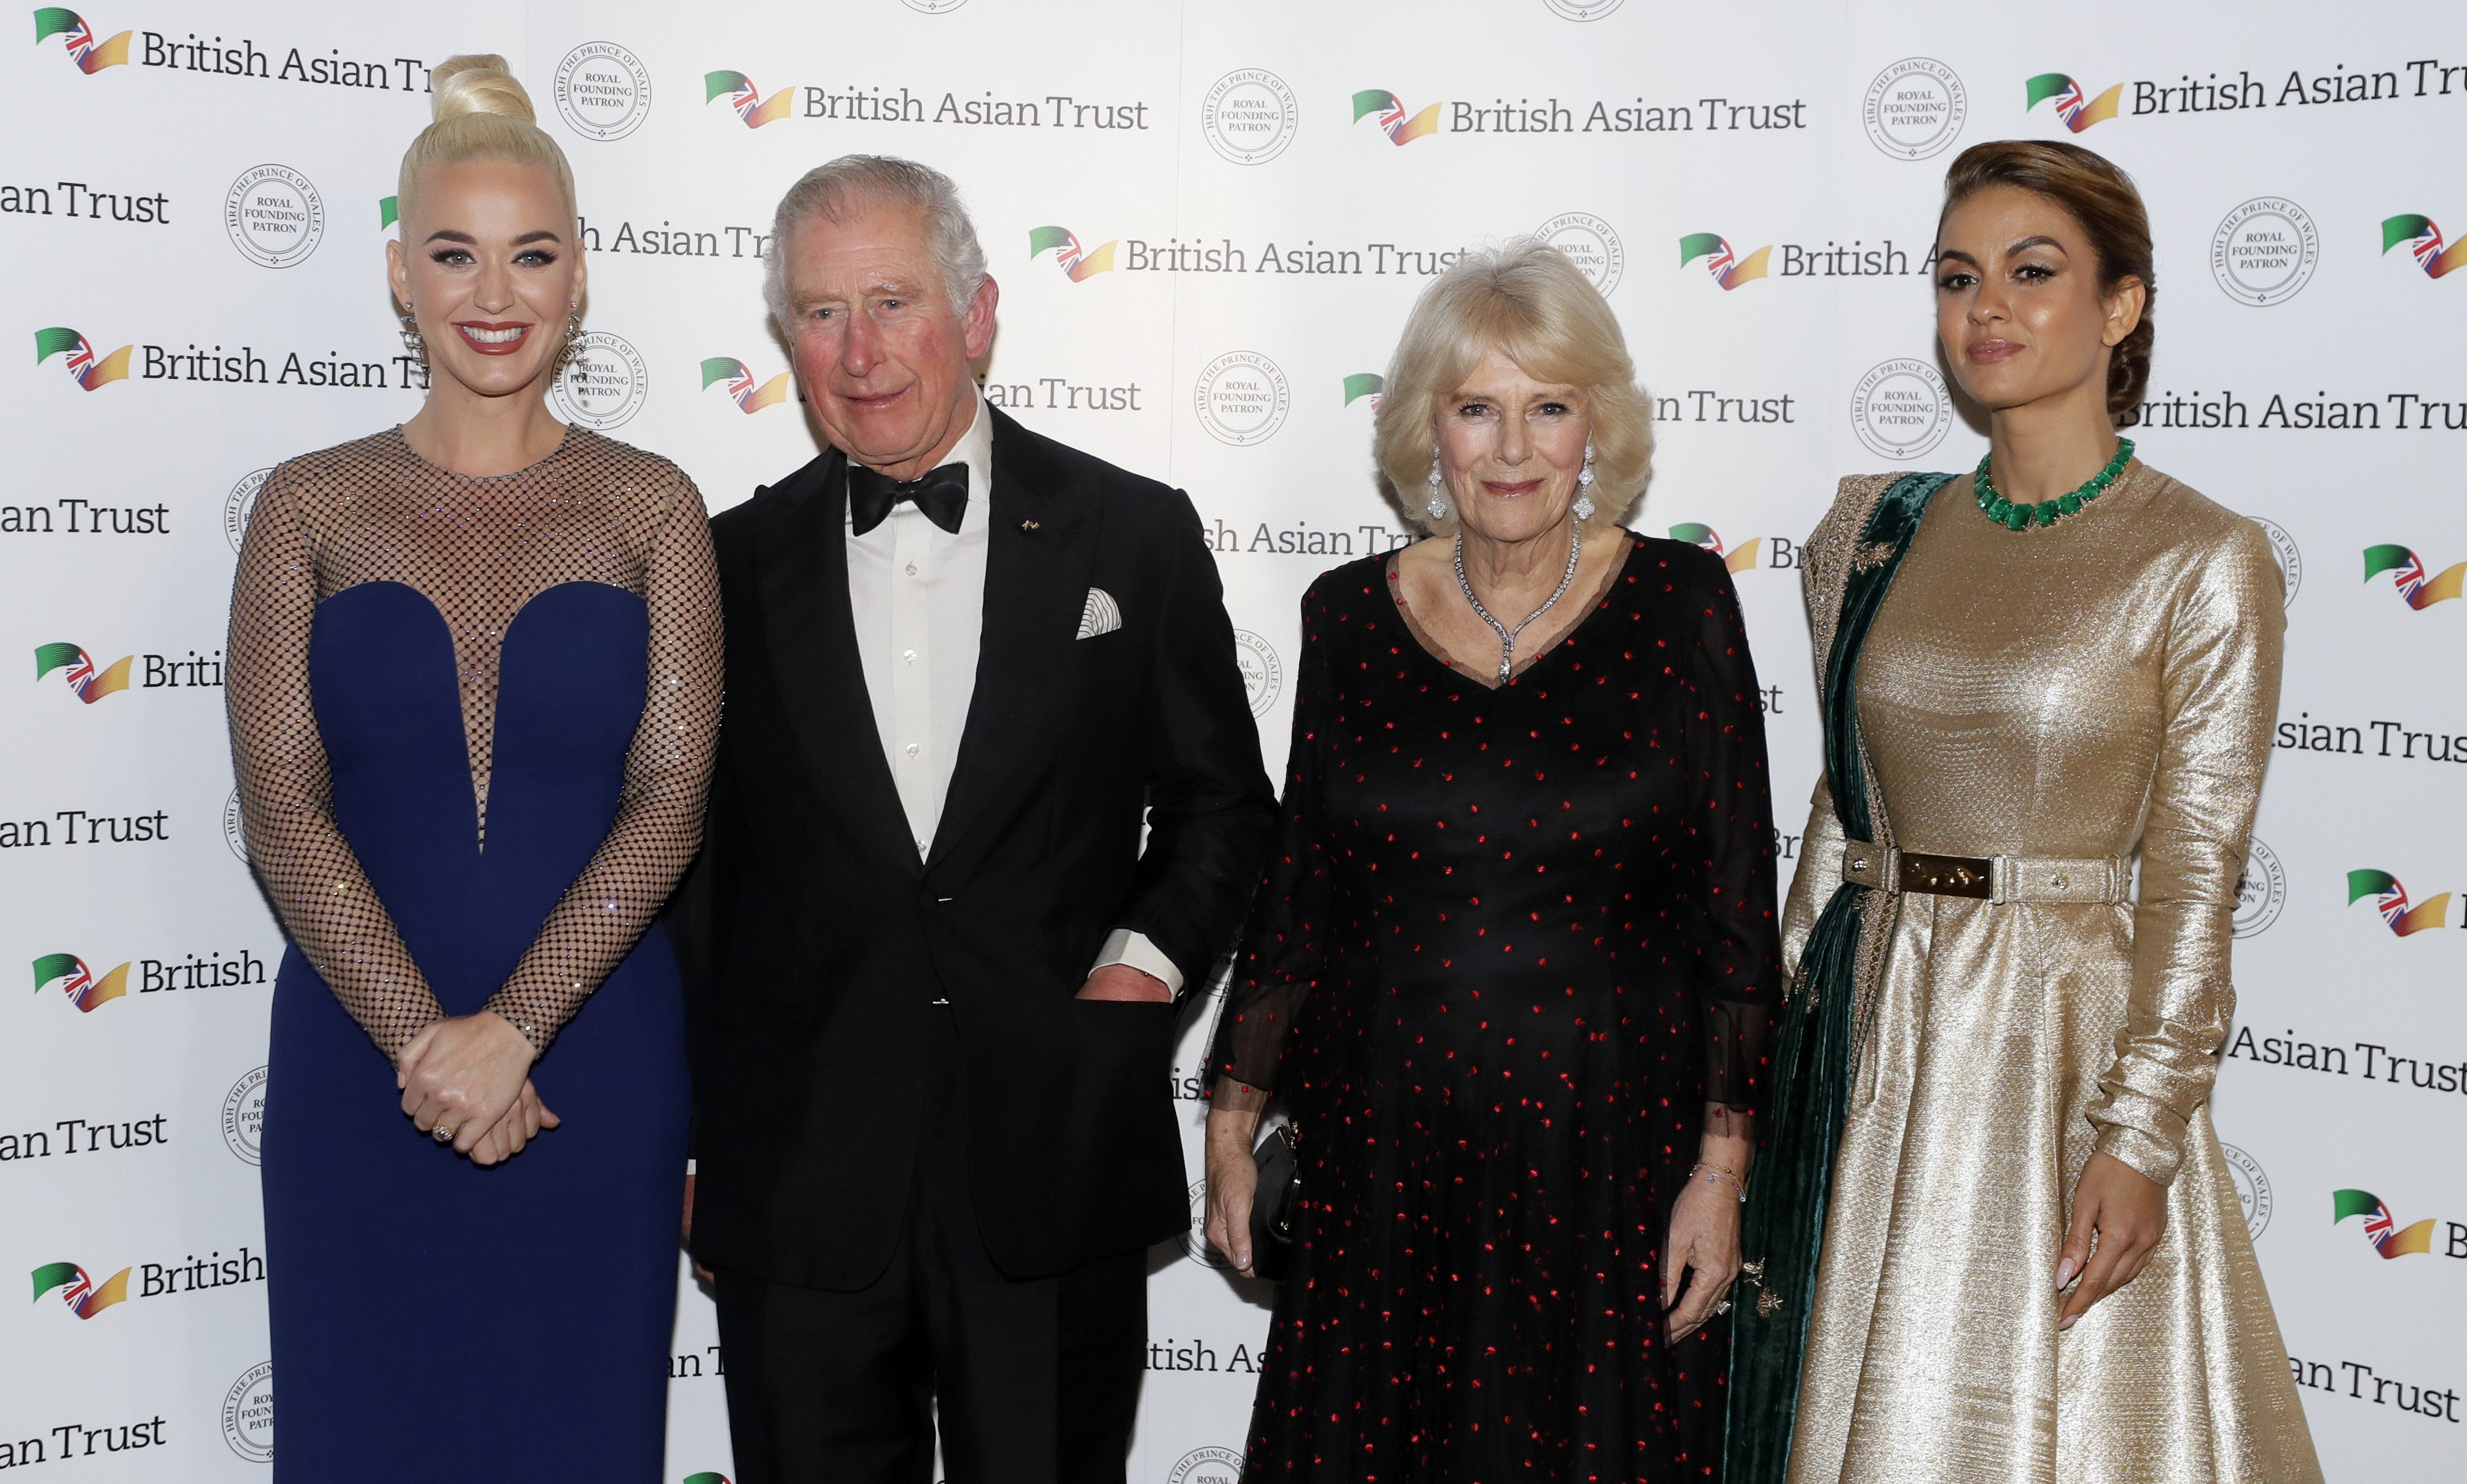 Prince Charles and his wife Camilla, with Katy Perry and Indian businesswoman Natasha Poonawalla at the British Asian Trust on February 4, 2020, in London, England. | Source: Getty Images.